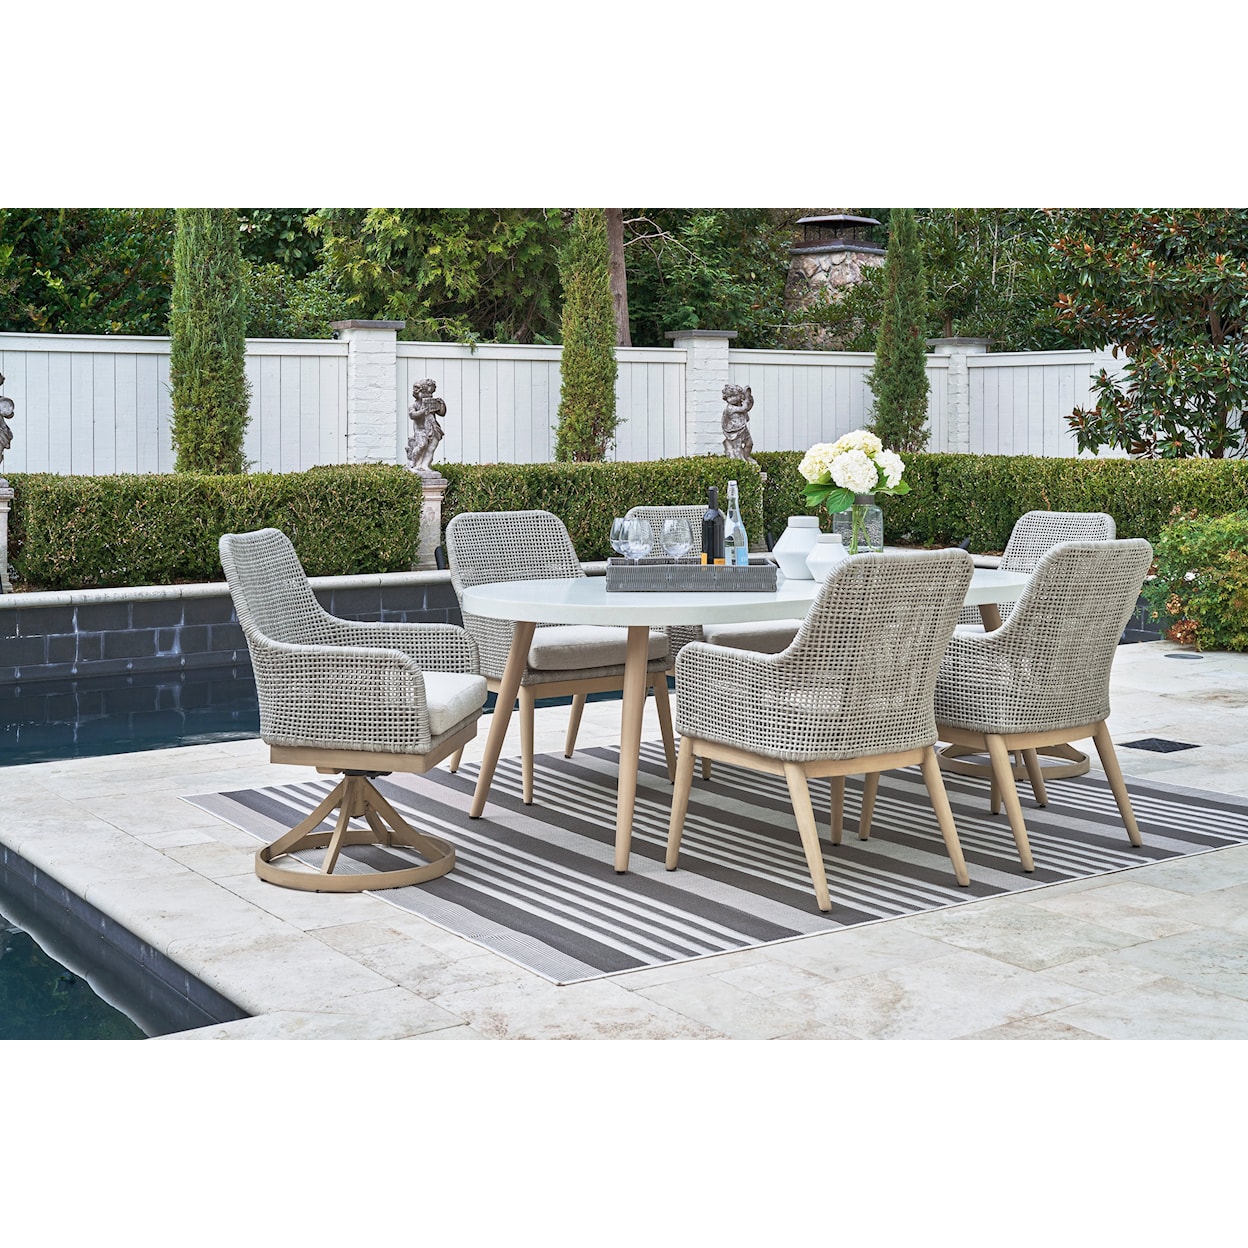 Signature Design by Ashley Seton Creek Outdoor Dining Arm Chair (Set of 2)